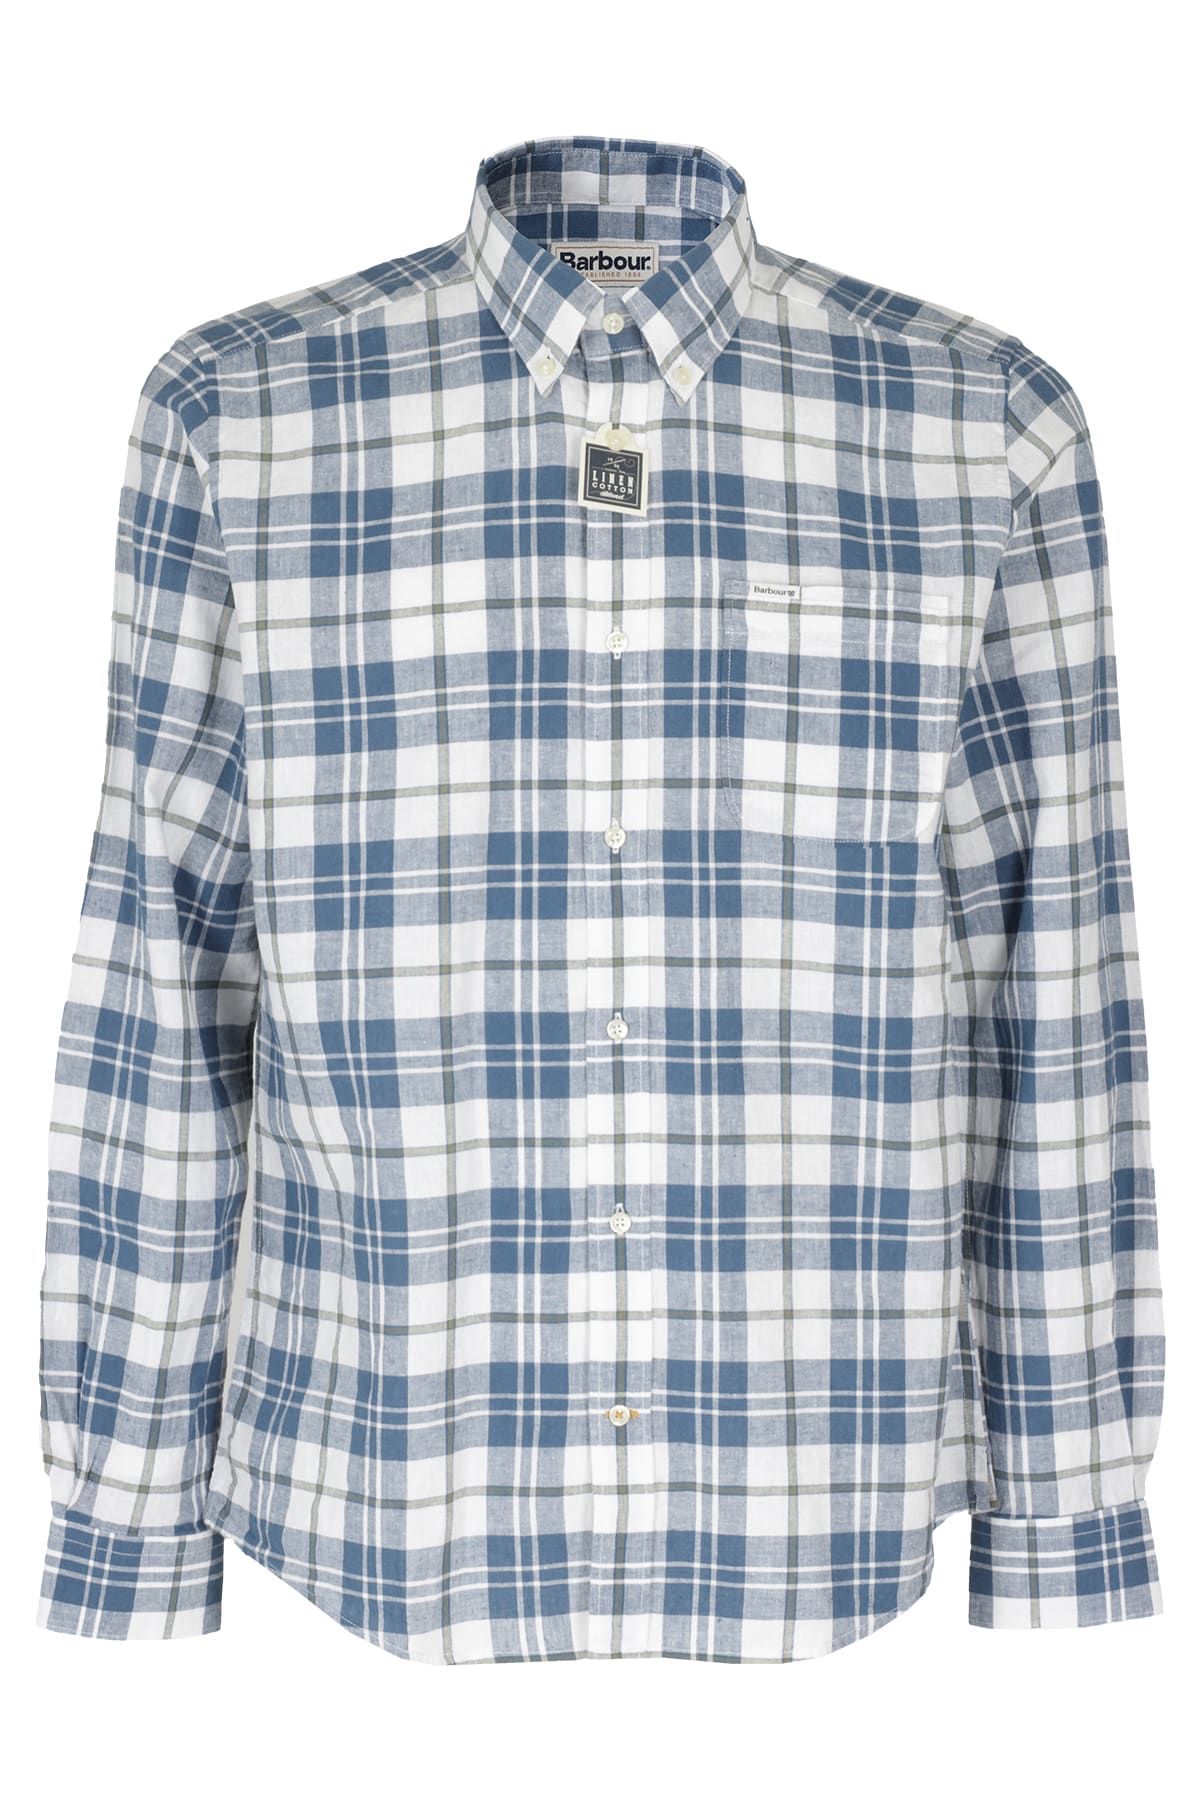 Barbour Thorpe Tailored Shirt Check